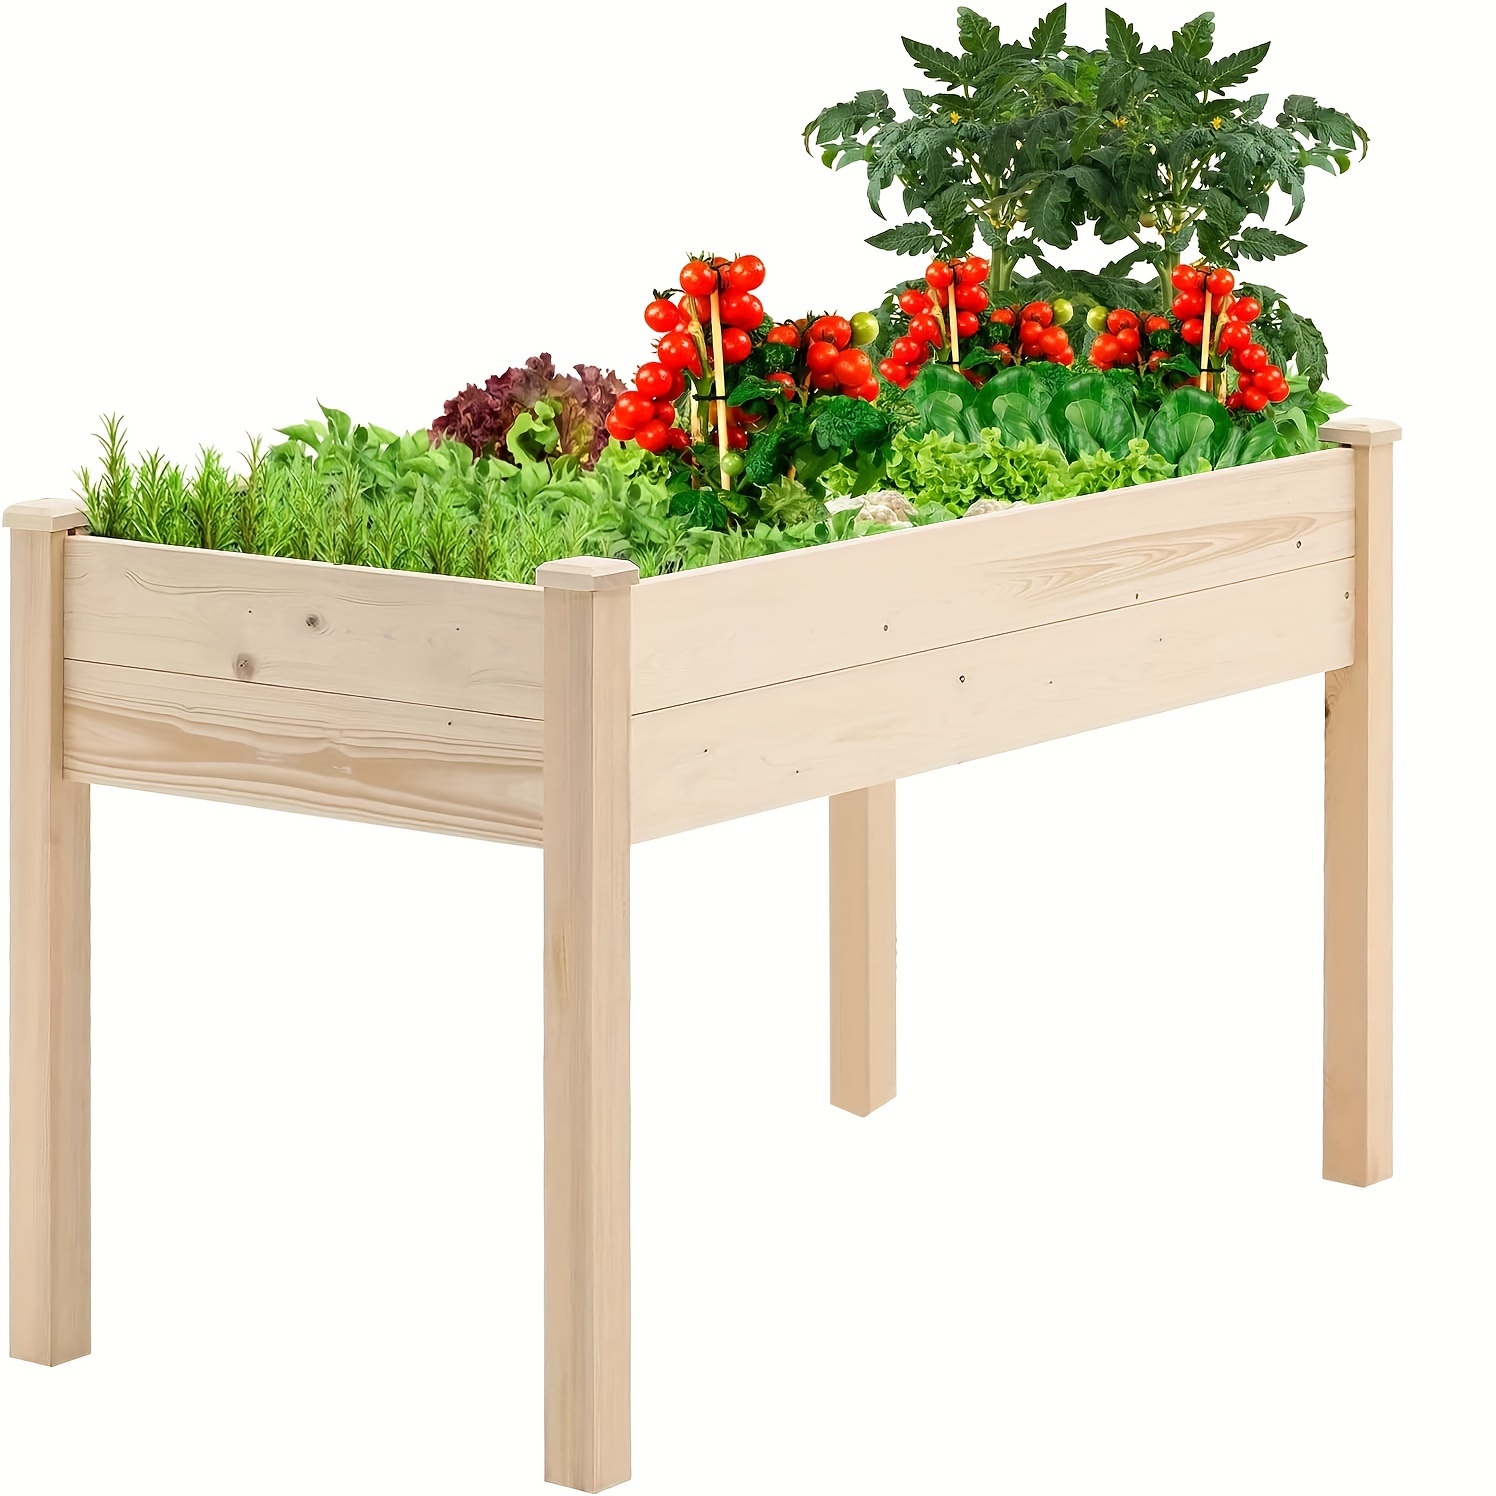 

4 Ft Wooden Raised Garden Bed Elevated Planter Box Stand For Vegetables Fruits Herb Grow, Patio Or Yard Gardening